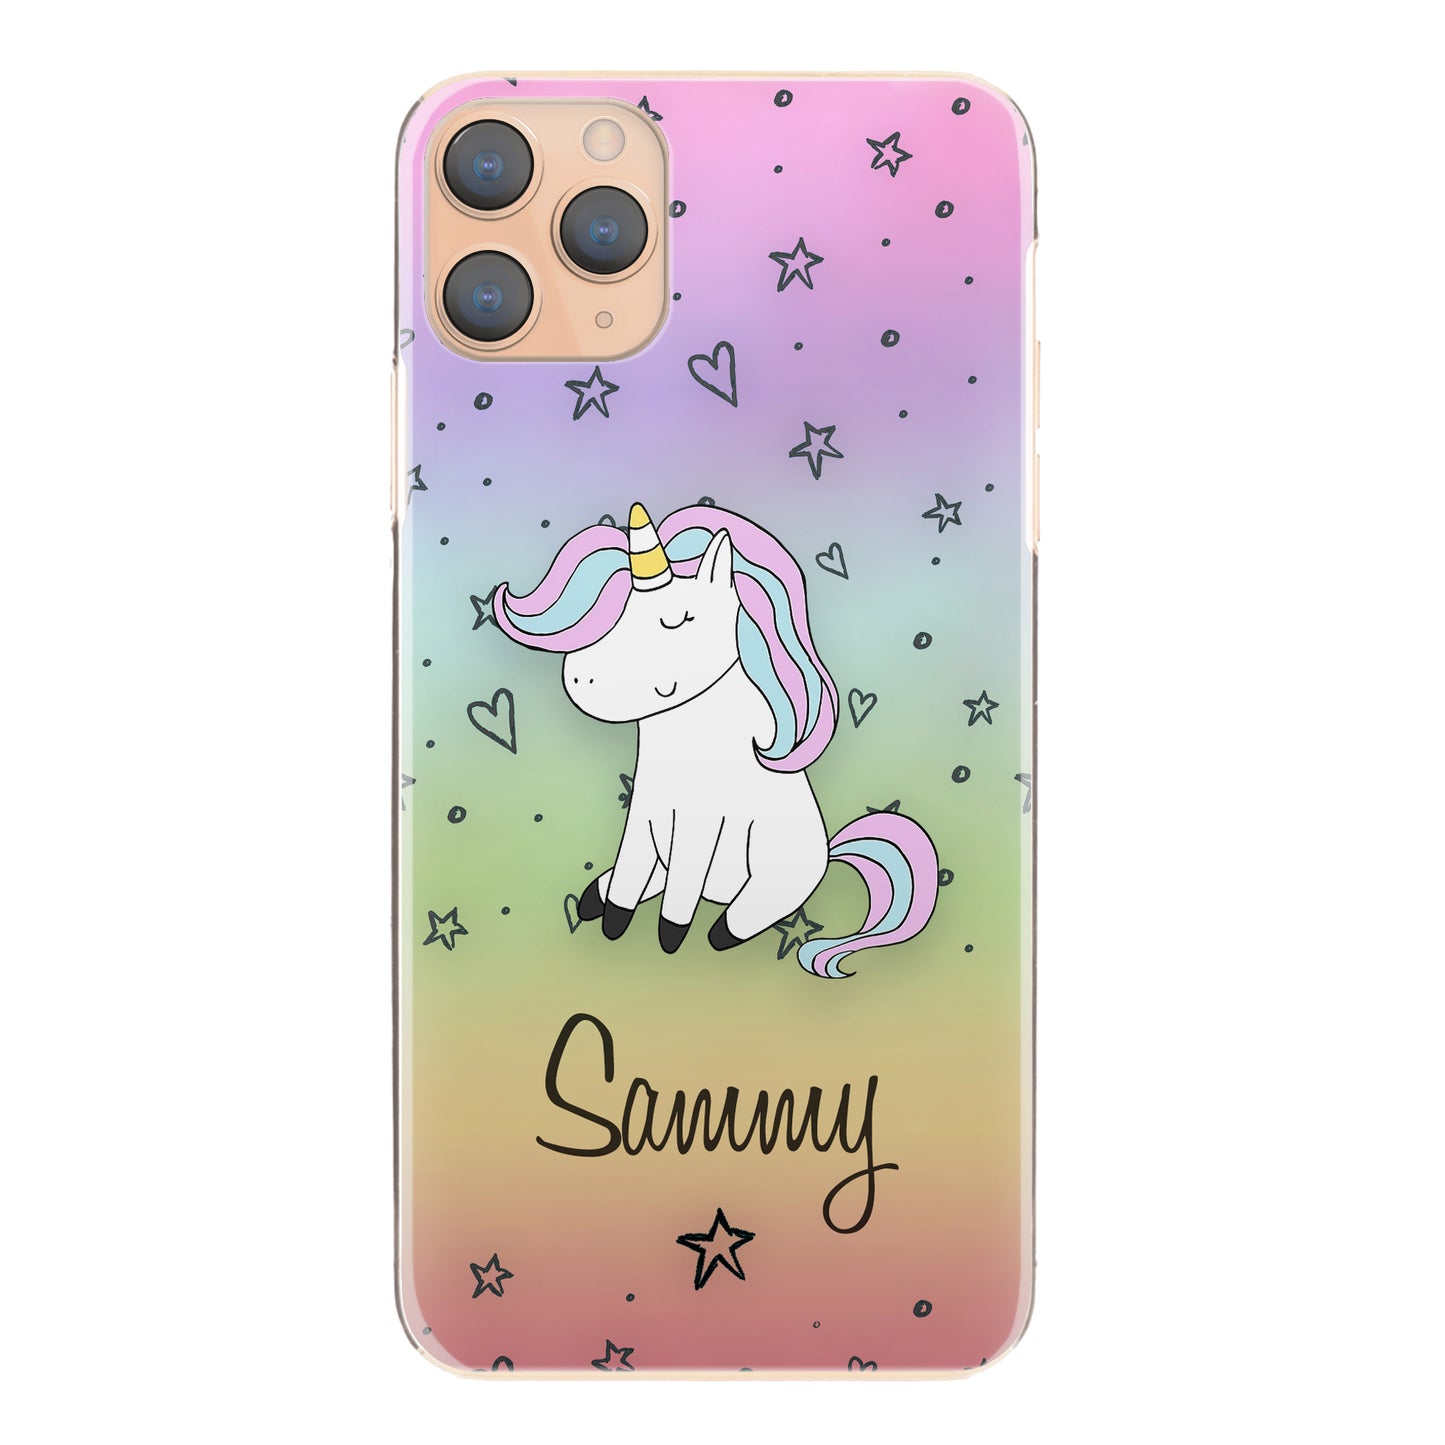 Personalised Huawei Phone Hard Case with Pink and Blue Unicorn on Rainbow Stars and Hearts